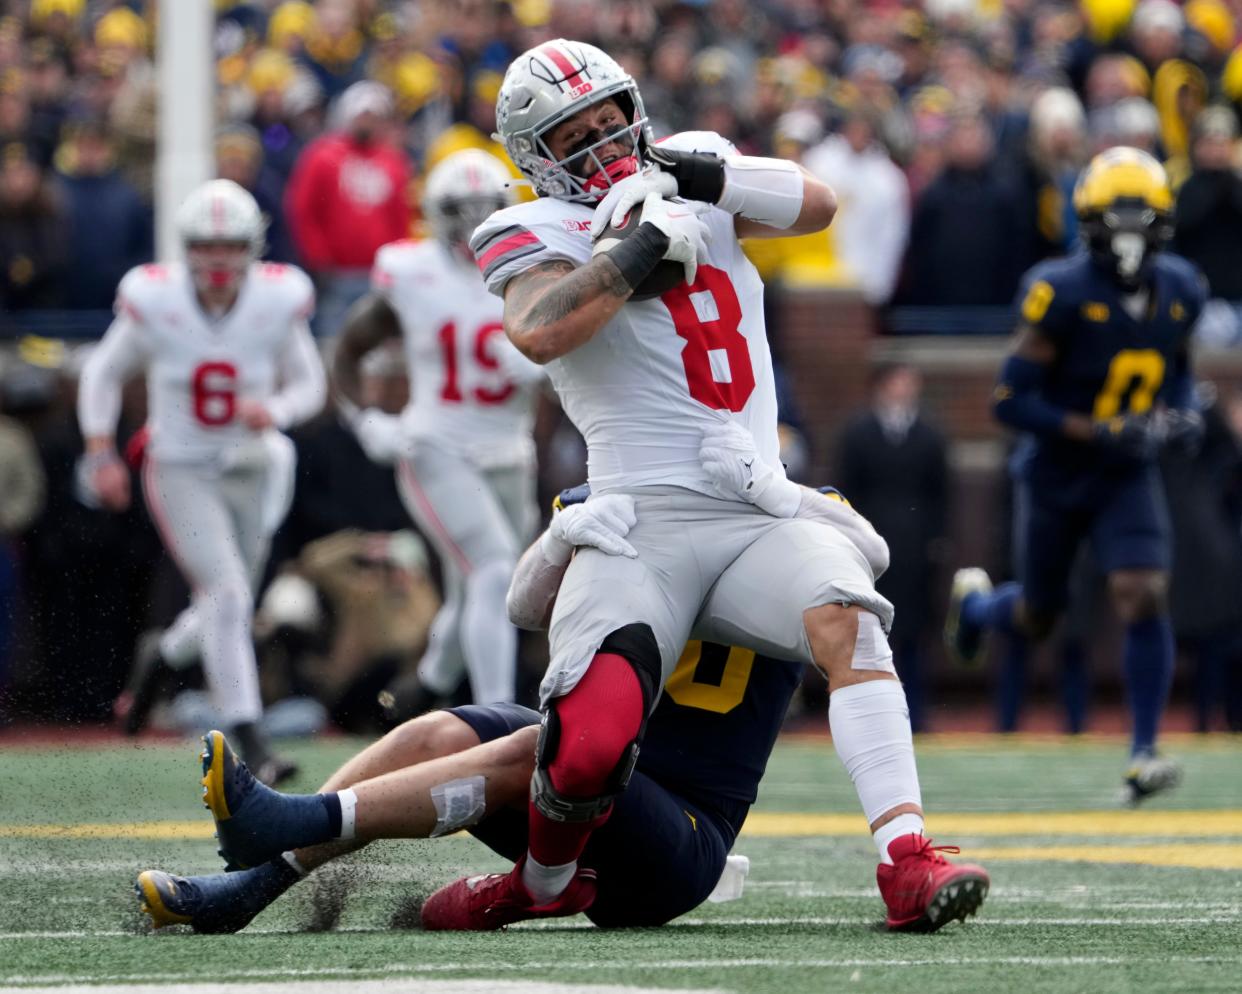 Cade Stover gets taken down after a catch against the Michigan Wolverines.